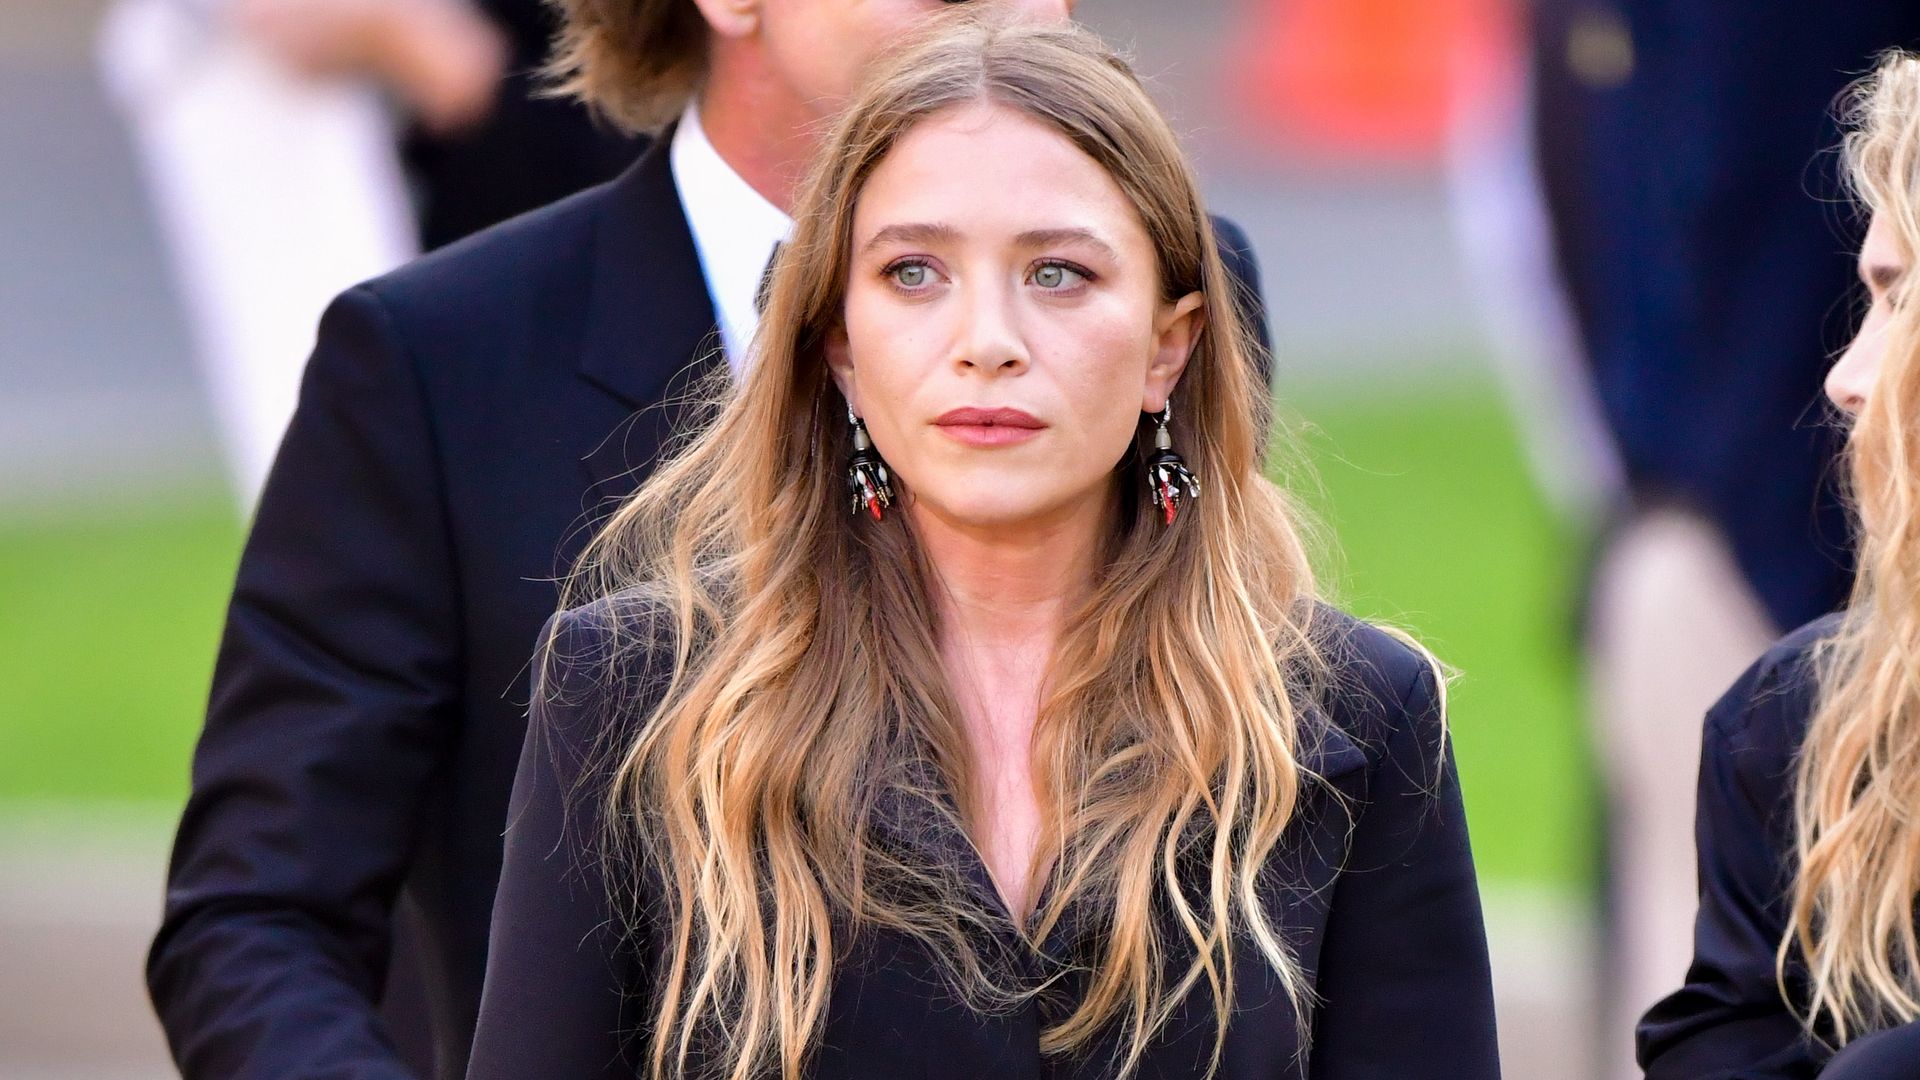 Mary-Kate Olsen arrives to the 2018 CFDA Fashion Awards at Brooklyn Museum on June 4, 2018 in New York City